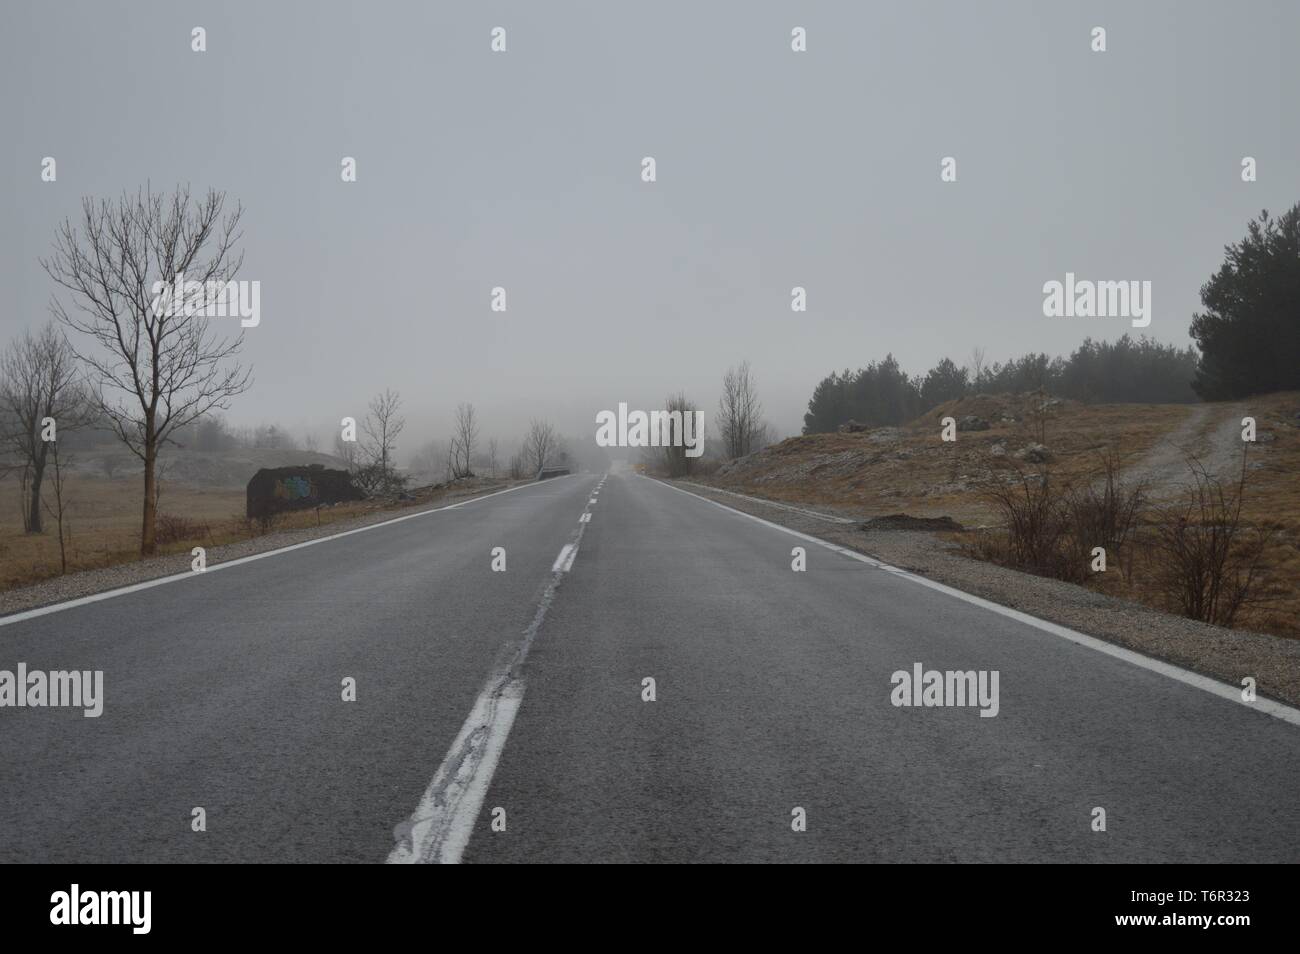 Straight mountain road disappearing in the distance on a misty day Stock Photo